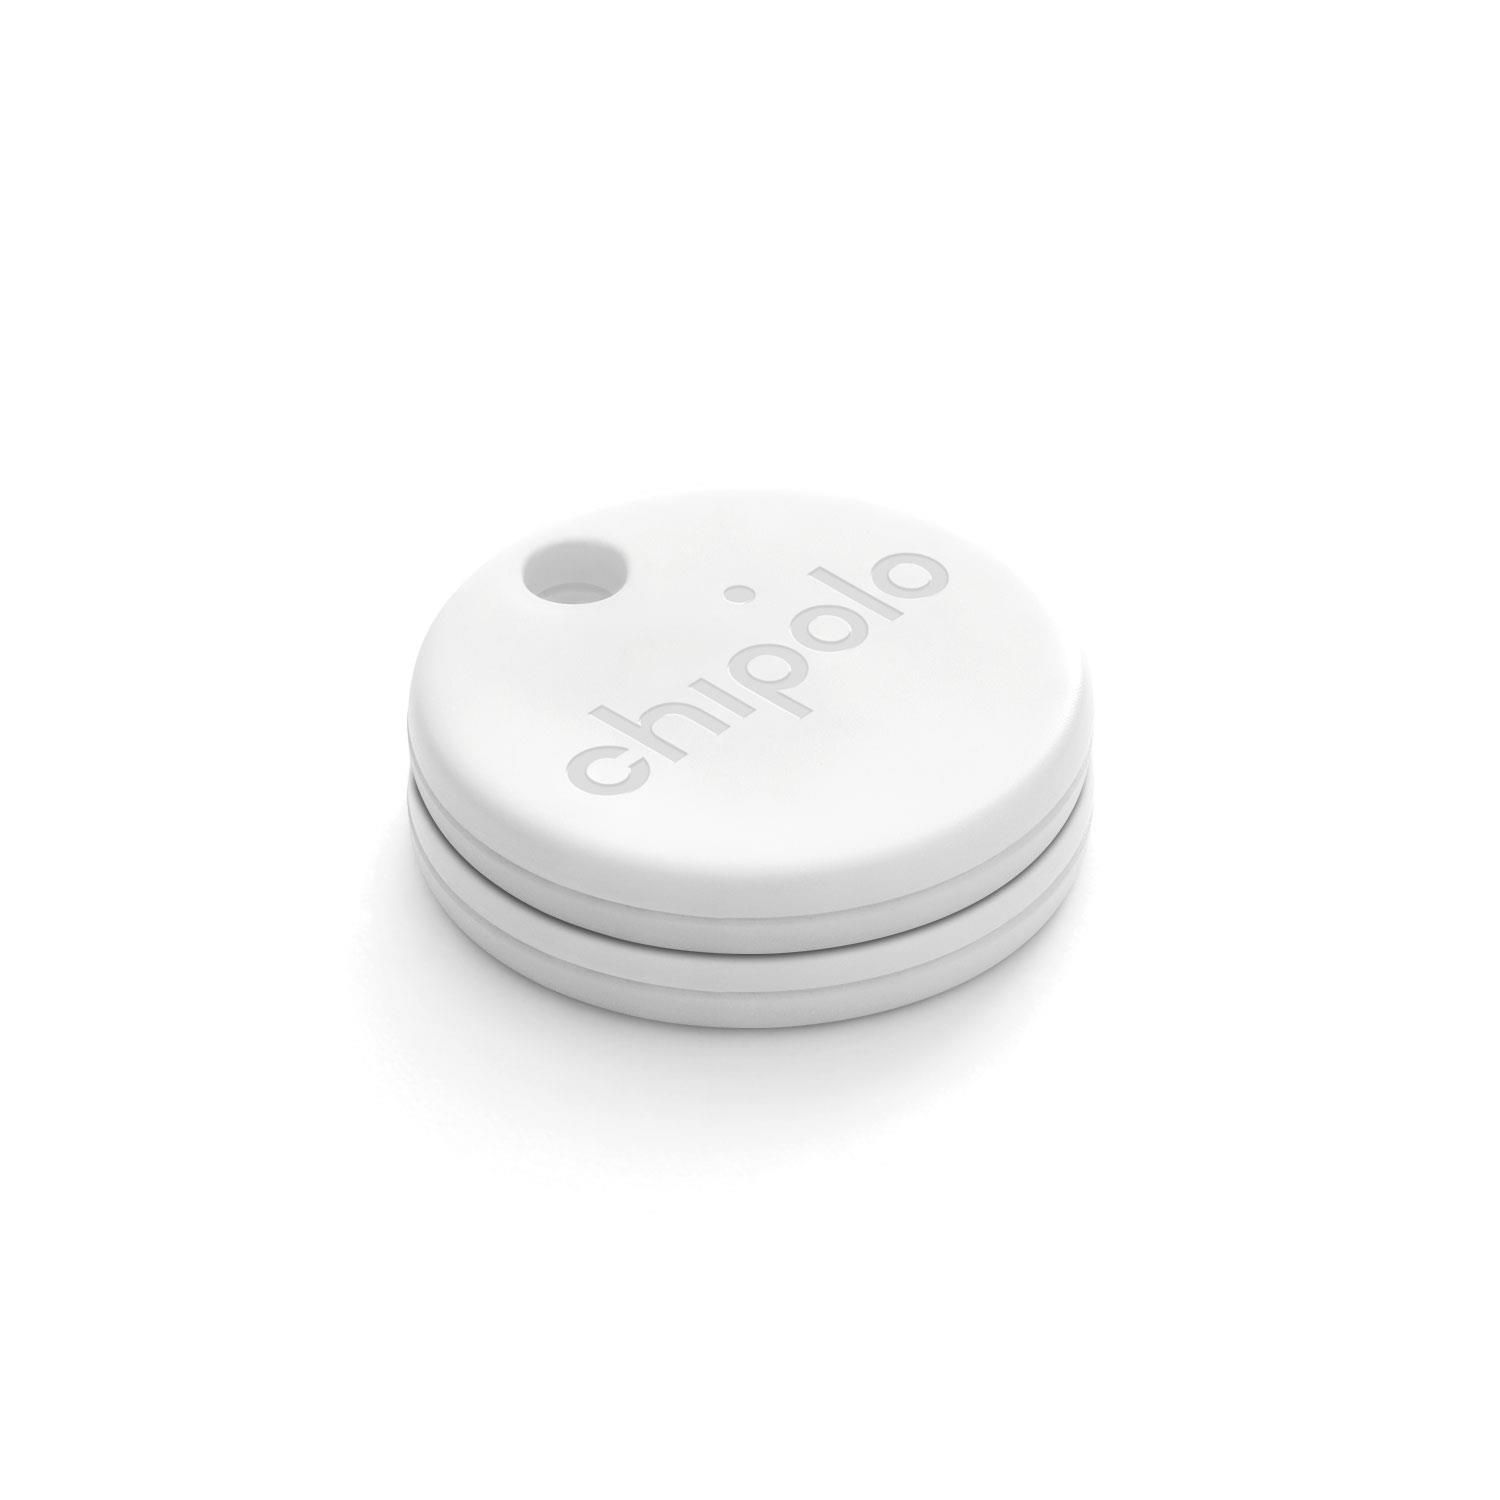 Chipolo ONE - Bluetooth Key and Item Finder - White